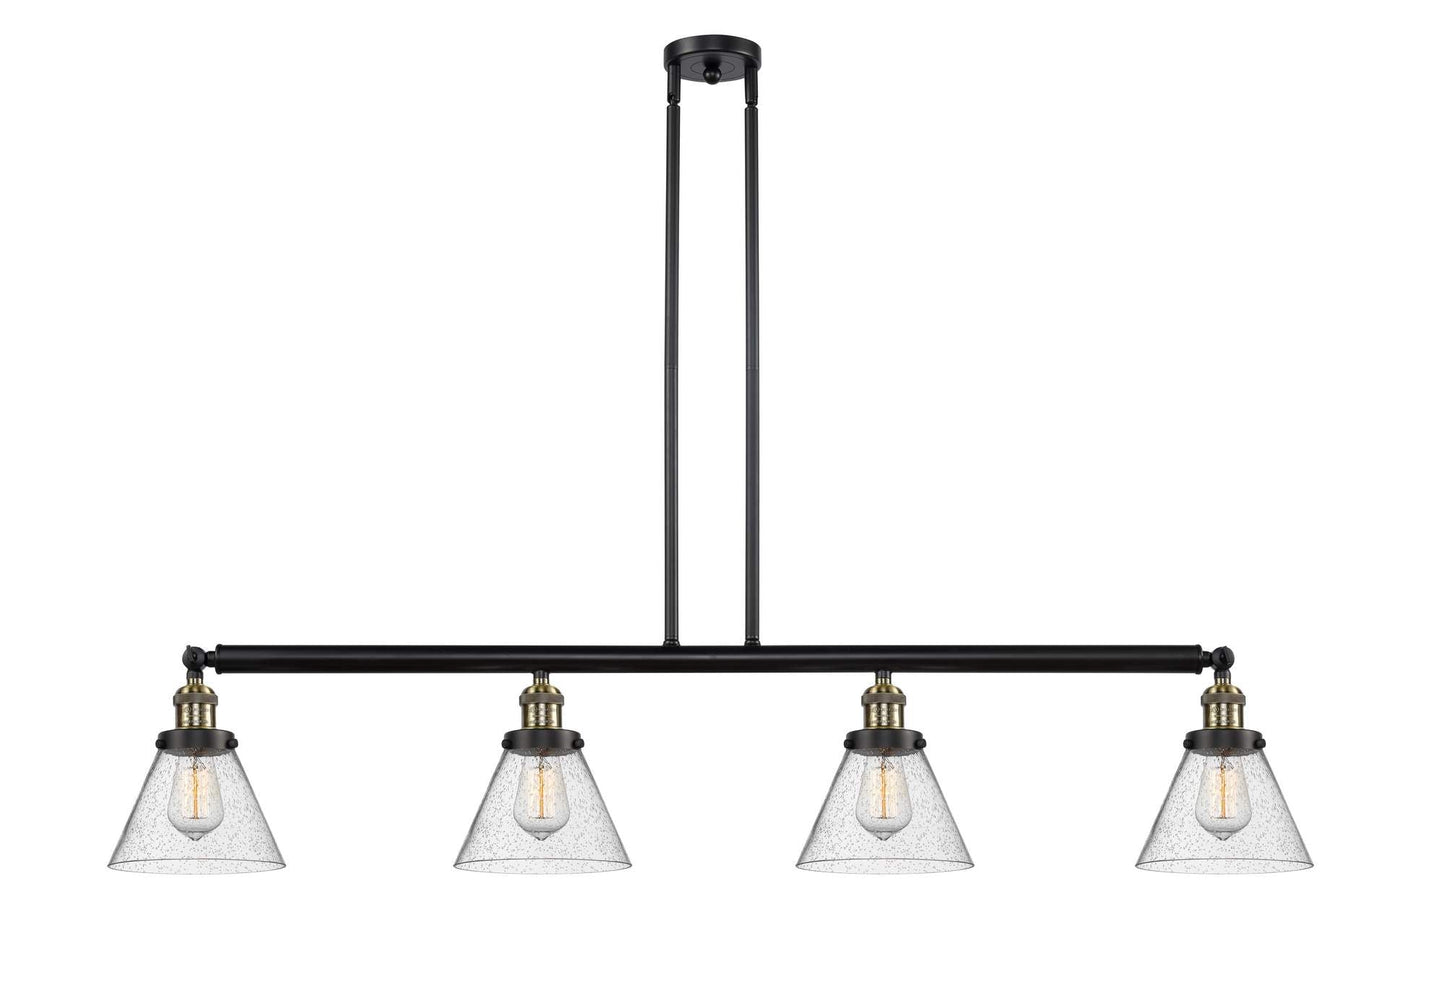 214-BAB-G44 4-Light 52.375" Black Antique Brass Island Light - Seedy Large Cone Glass - LED Bulb - Dimmensions: 52.375 x 7.75 x 10<br>Minimum Height : 20.25<br>Maximum Height : 44.25 - Sloped Ceiling Compatible: Yes